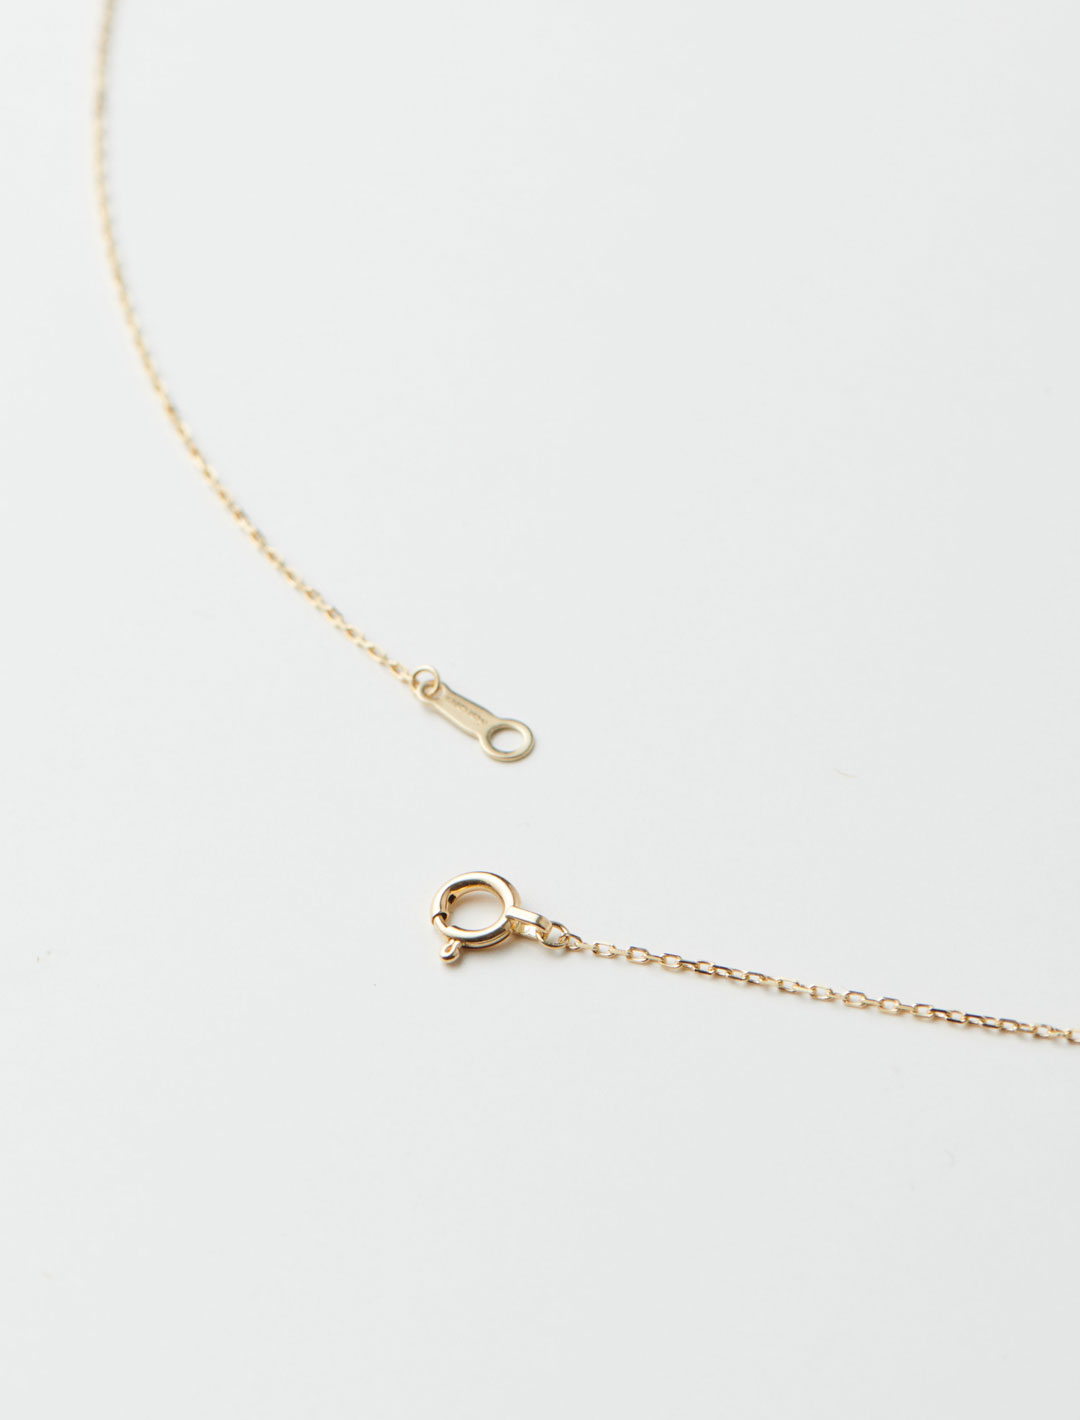 gyoku Necklace L 80cm - Yellow Gold